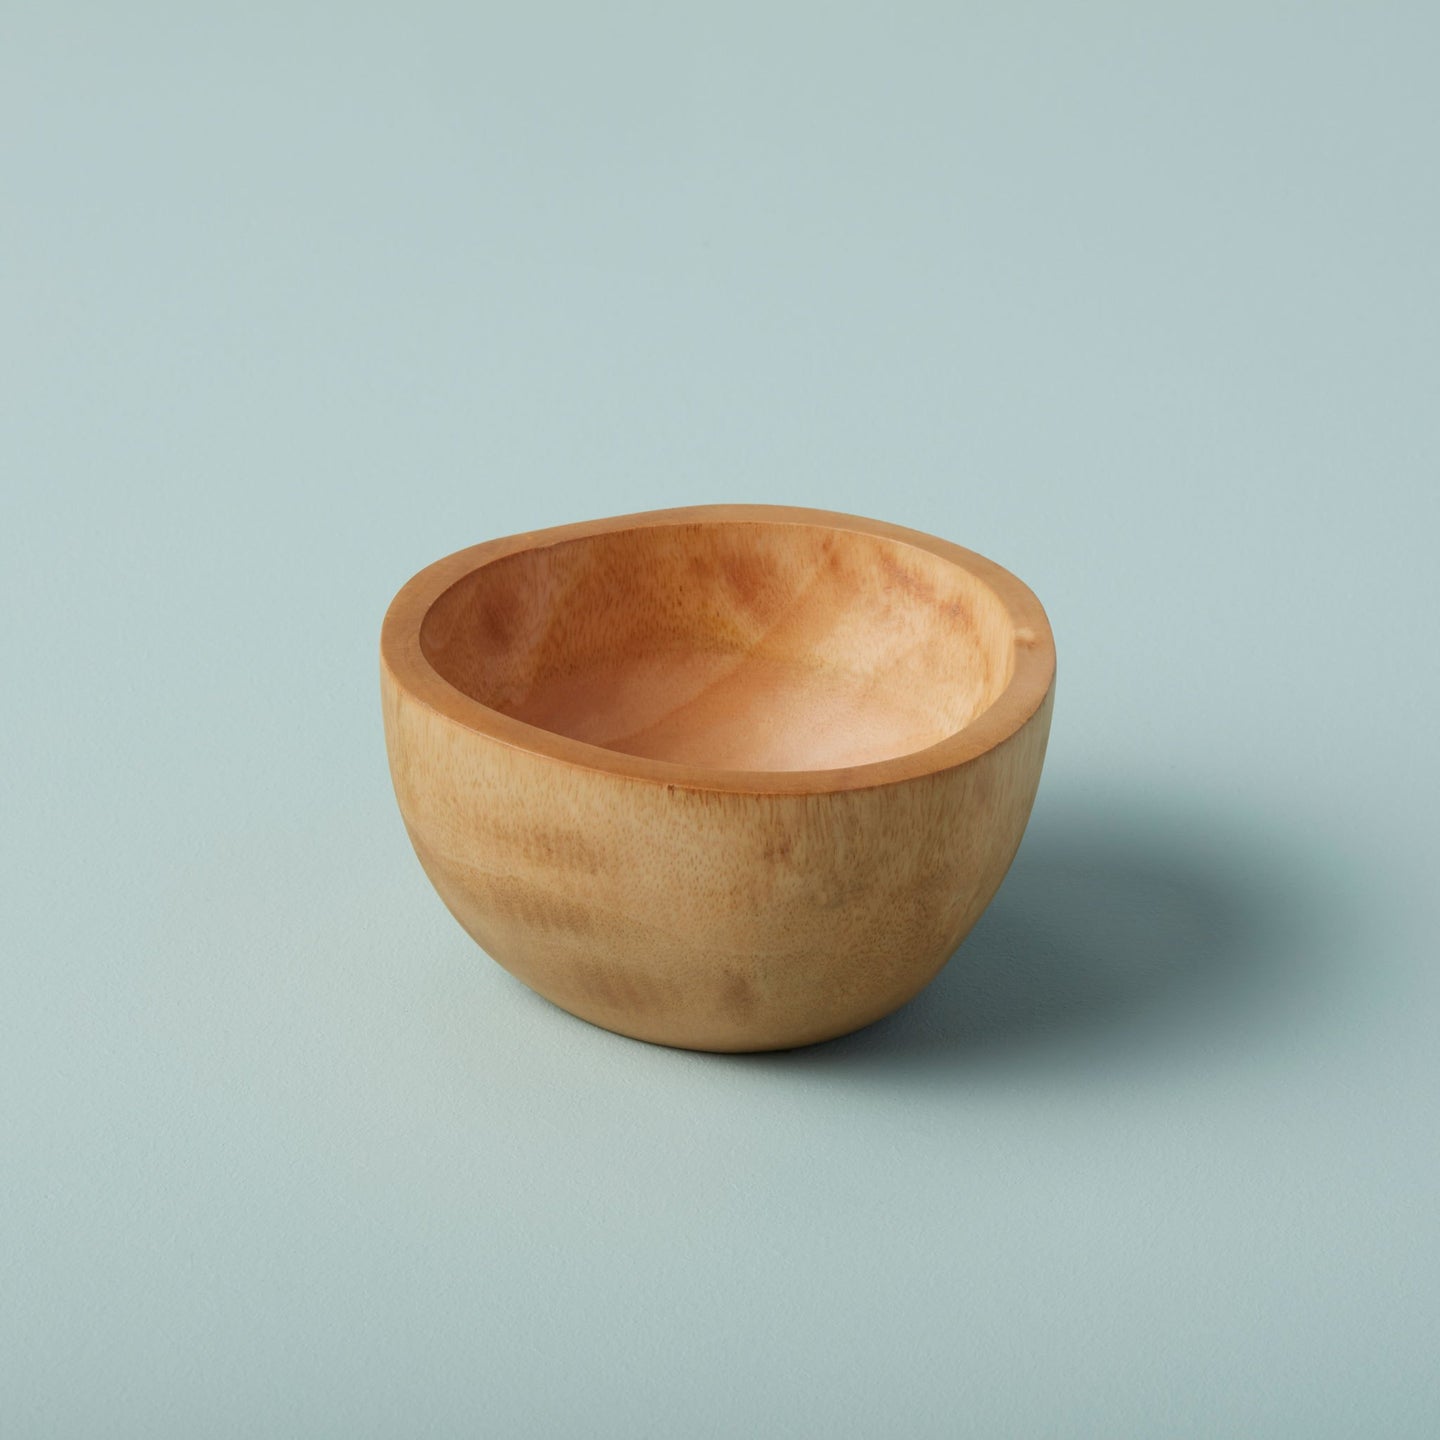 Hand Poured Candle in Mango Wood Bowl